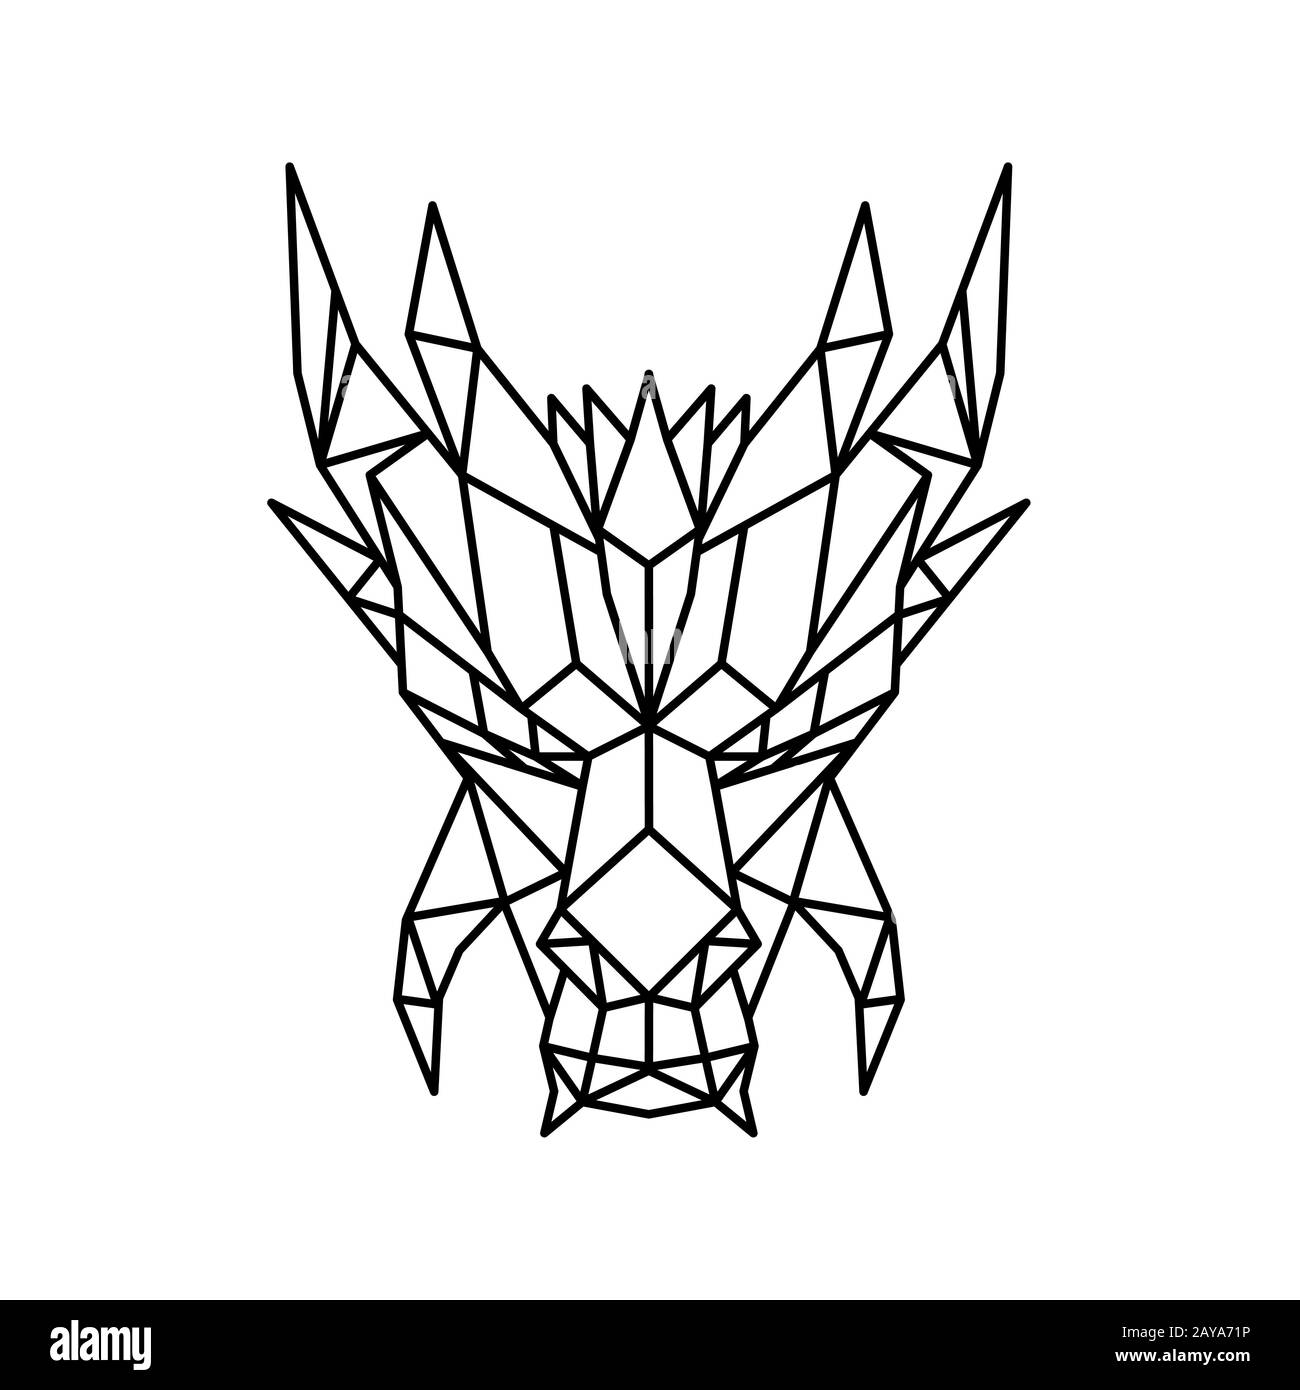 Dragon Head Front Low Poly Black and White Stock Photo